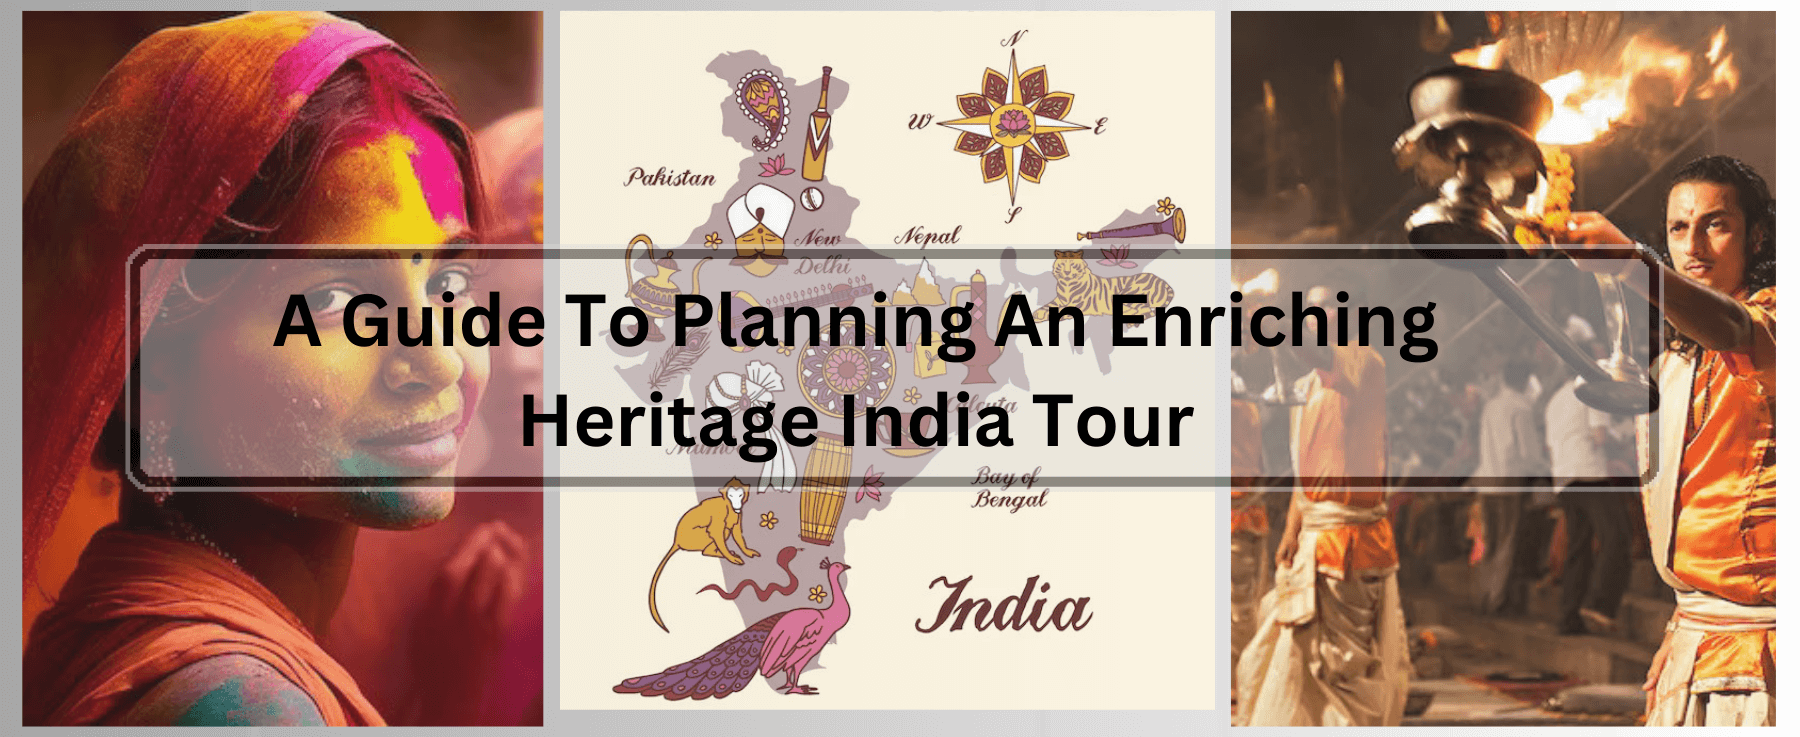 A Guide To Planning An Enriching Heritage India Tour